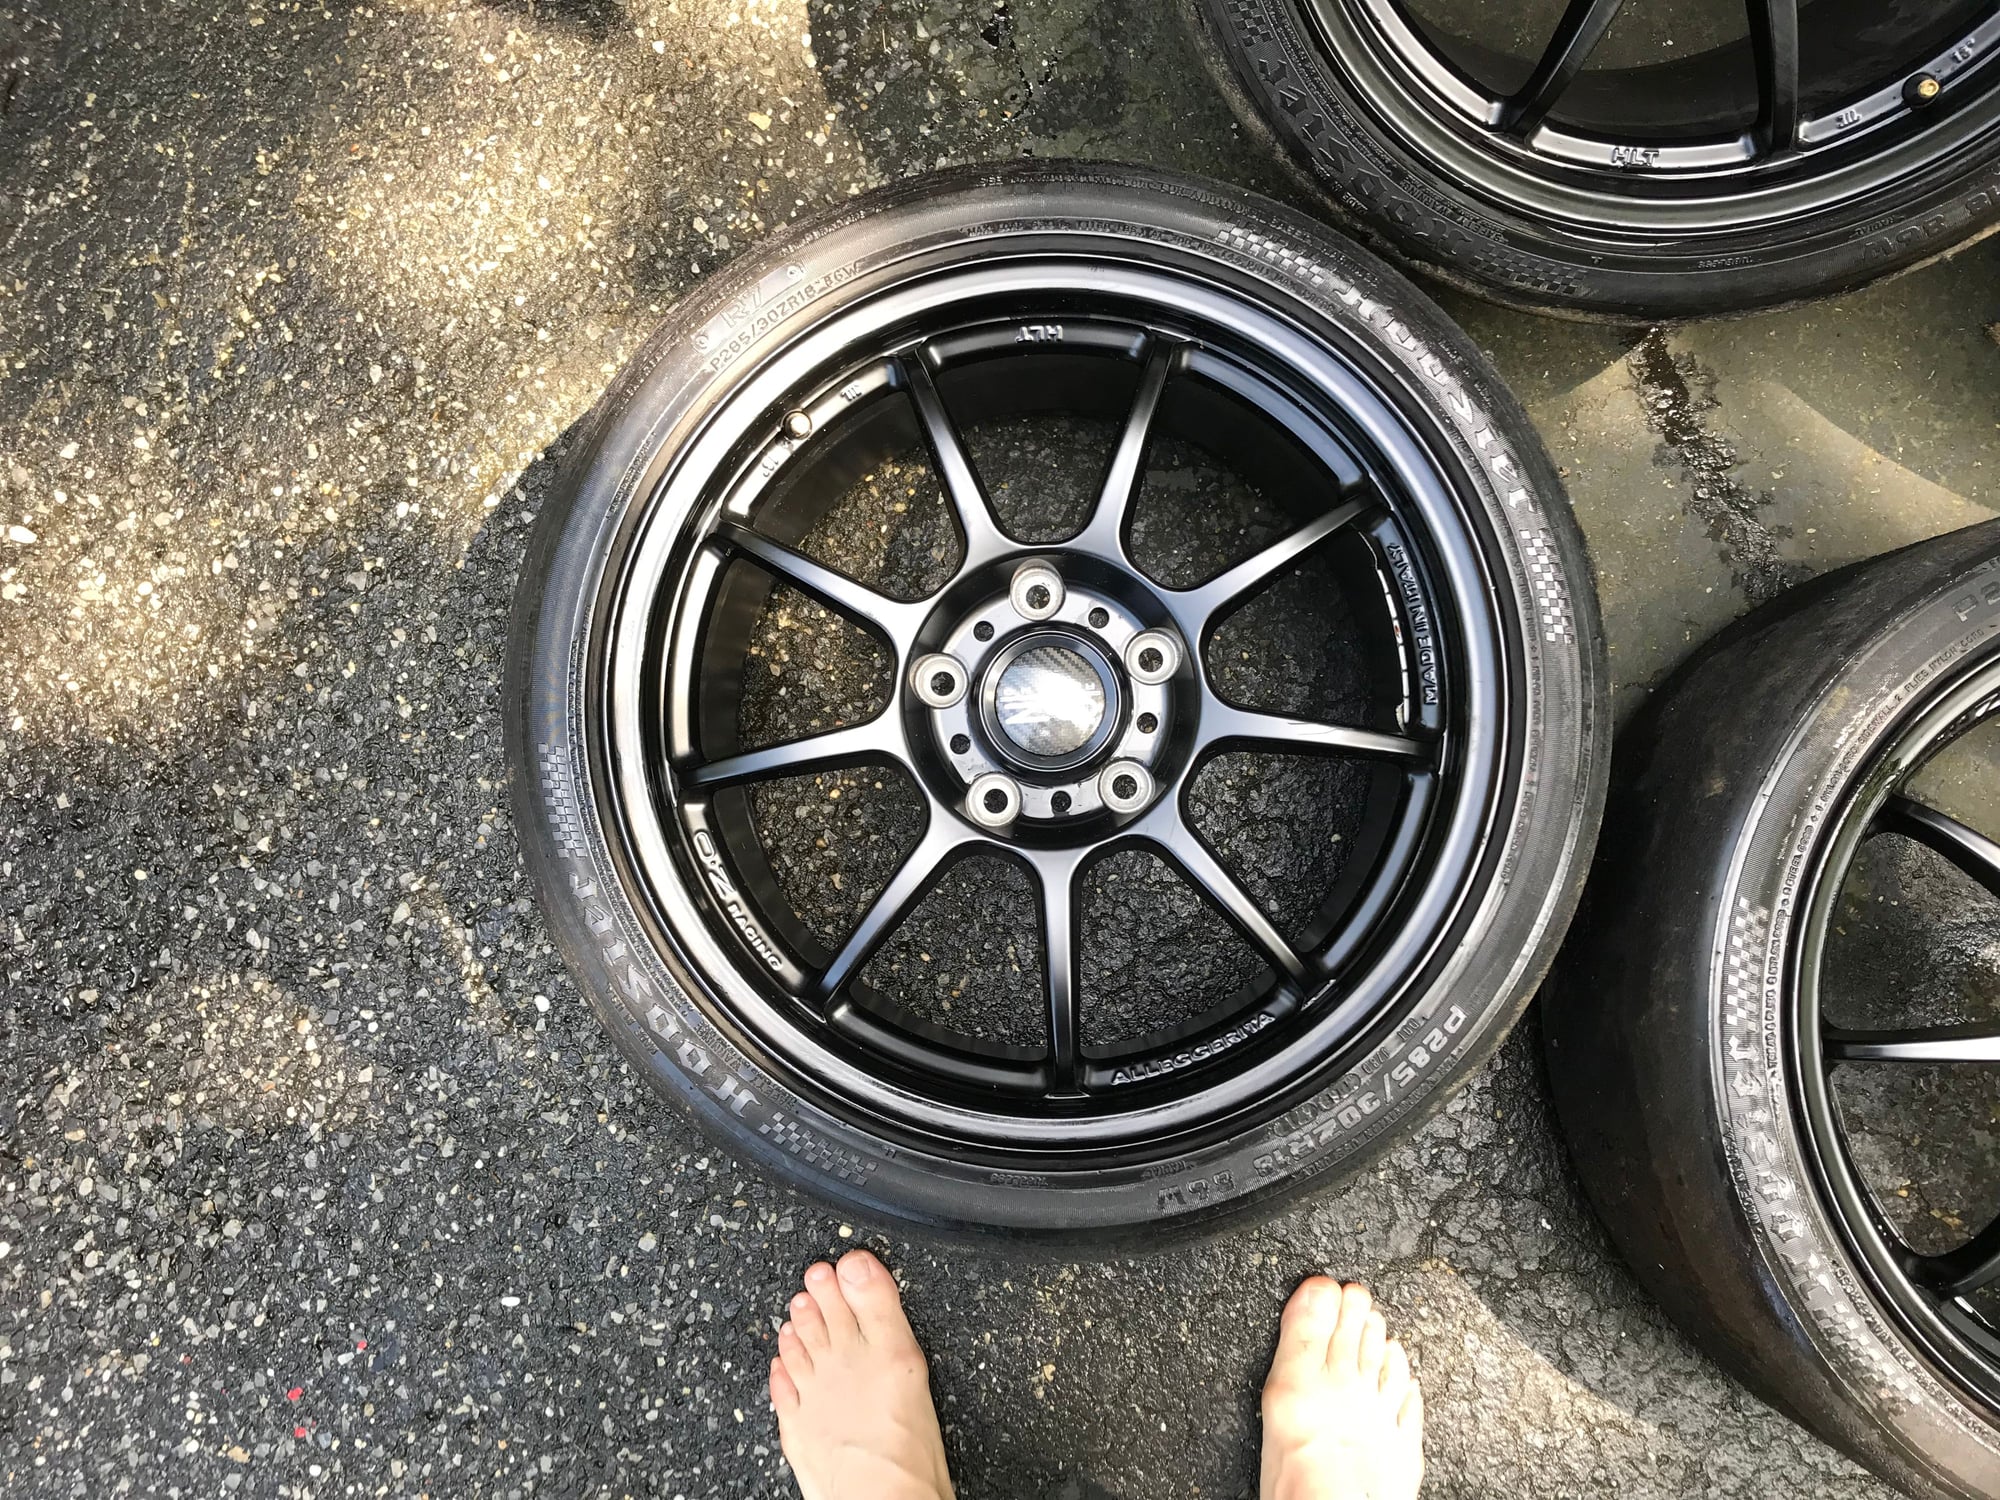 Wheels and Tires/Axles - Porsche 18" O.Z. ALLEGGERITA HLT BLK PAINT with Hossier A7 - $1700 - Used - 1999 to 2004 Porsche 911 - St James, NY 11780, United States